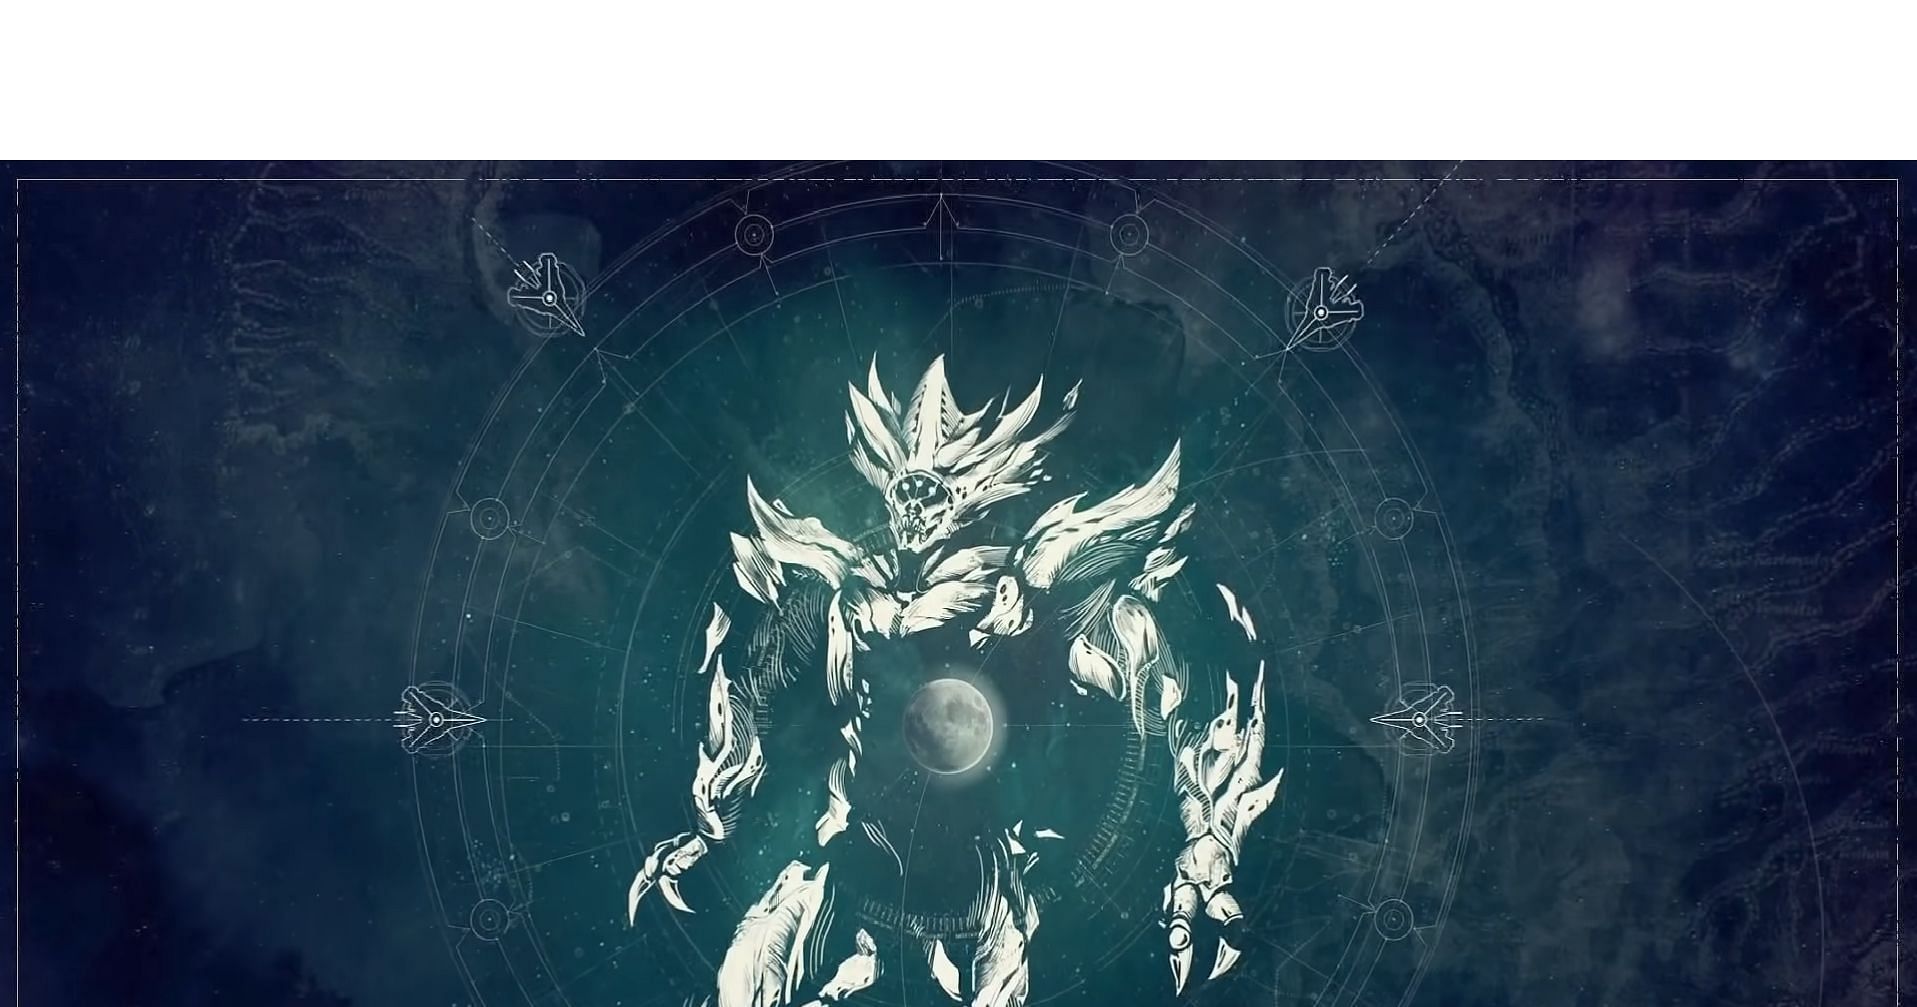 Crota was the first to kick our backsides (Image via Bungie)